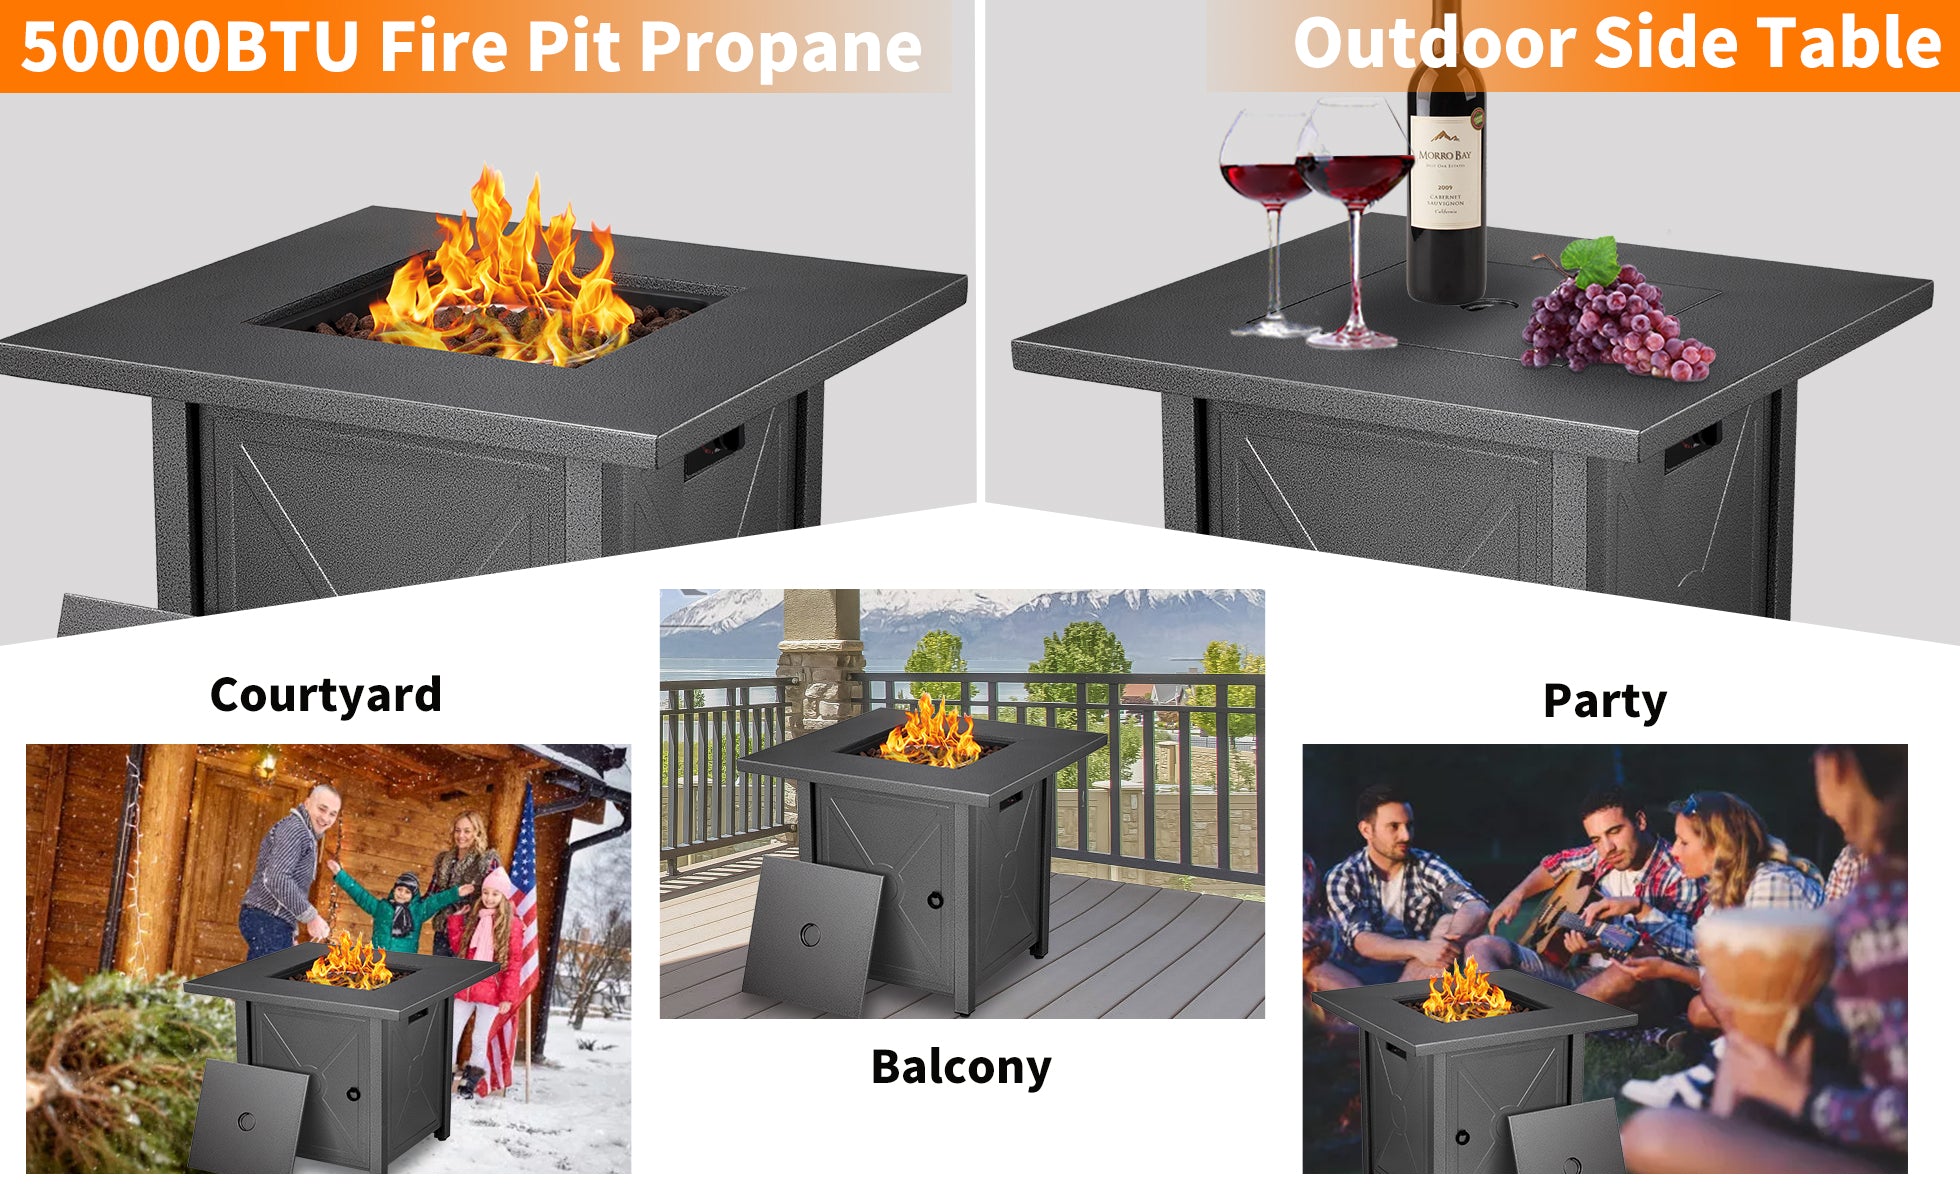 R.W.FLAME 28 inch Propane Fire Pit,2 in 1 Fire Pit Table 40,000 BTU with Glass Cover